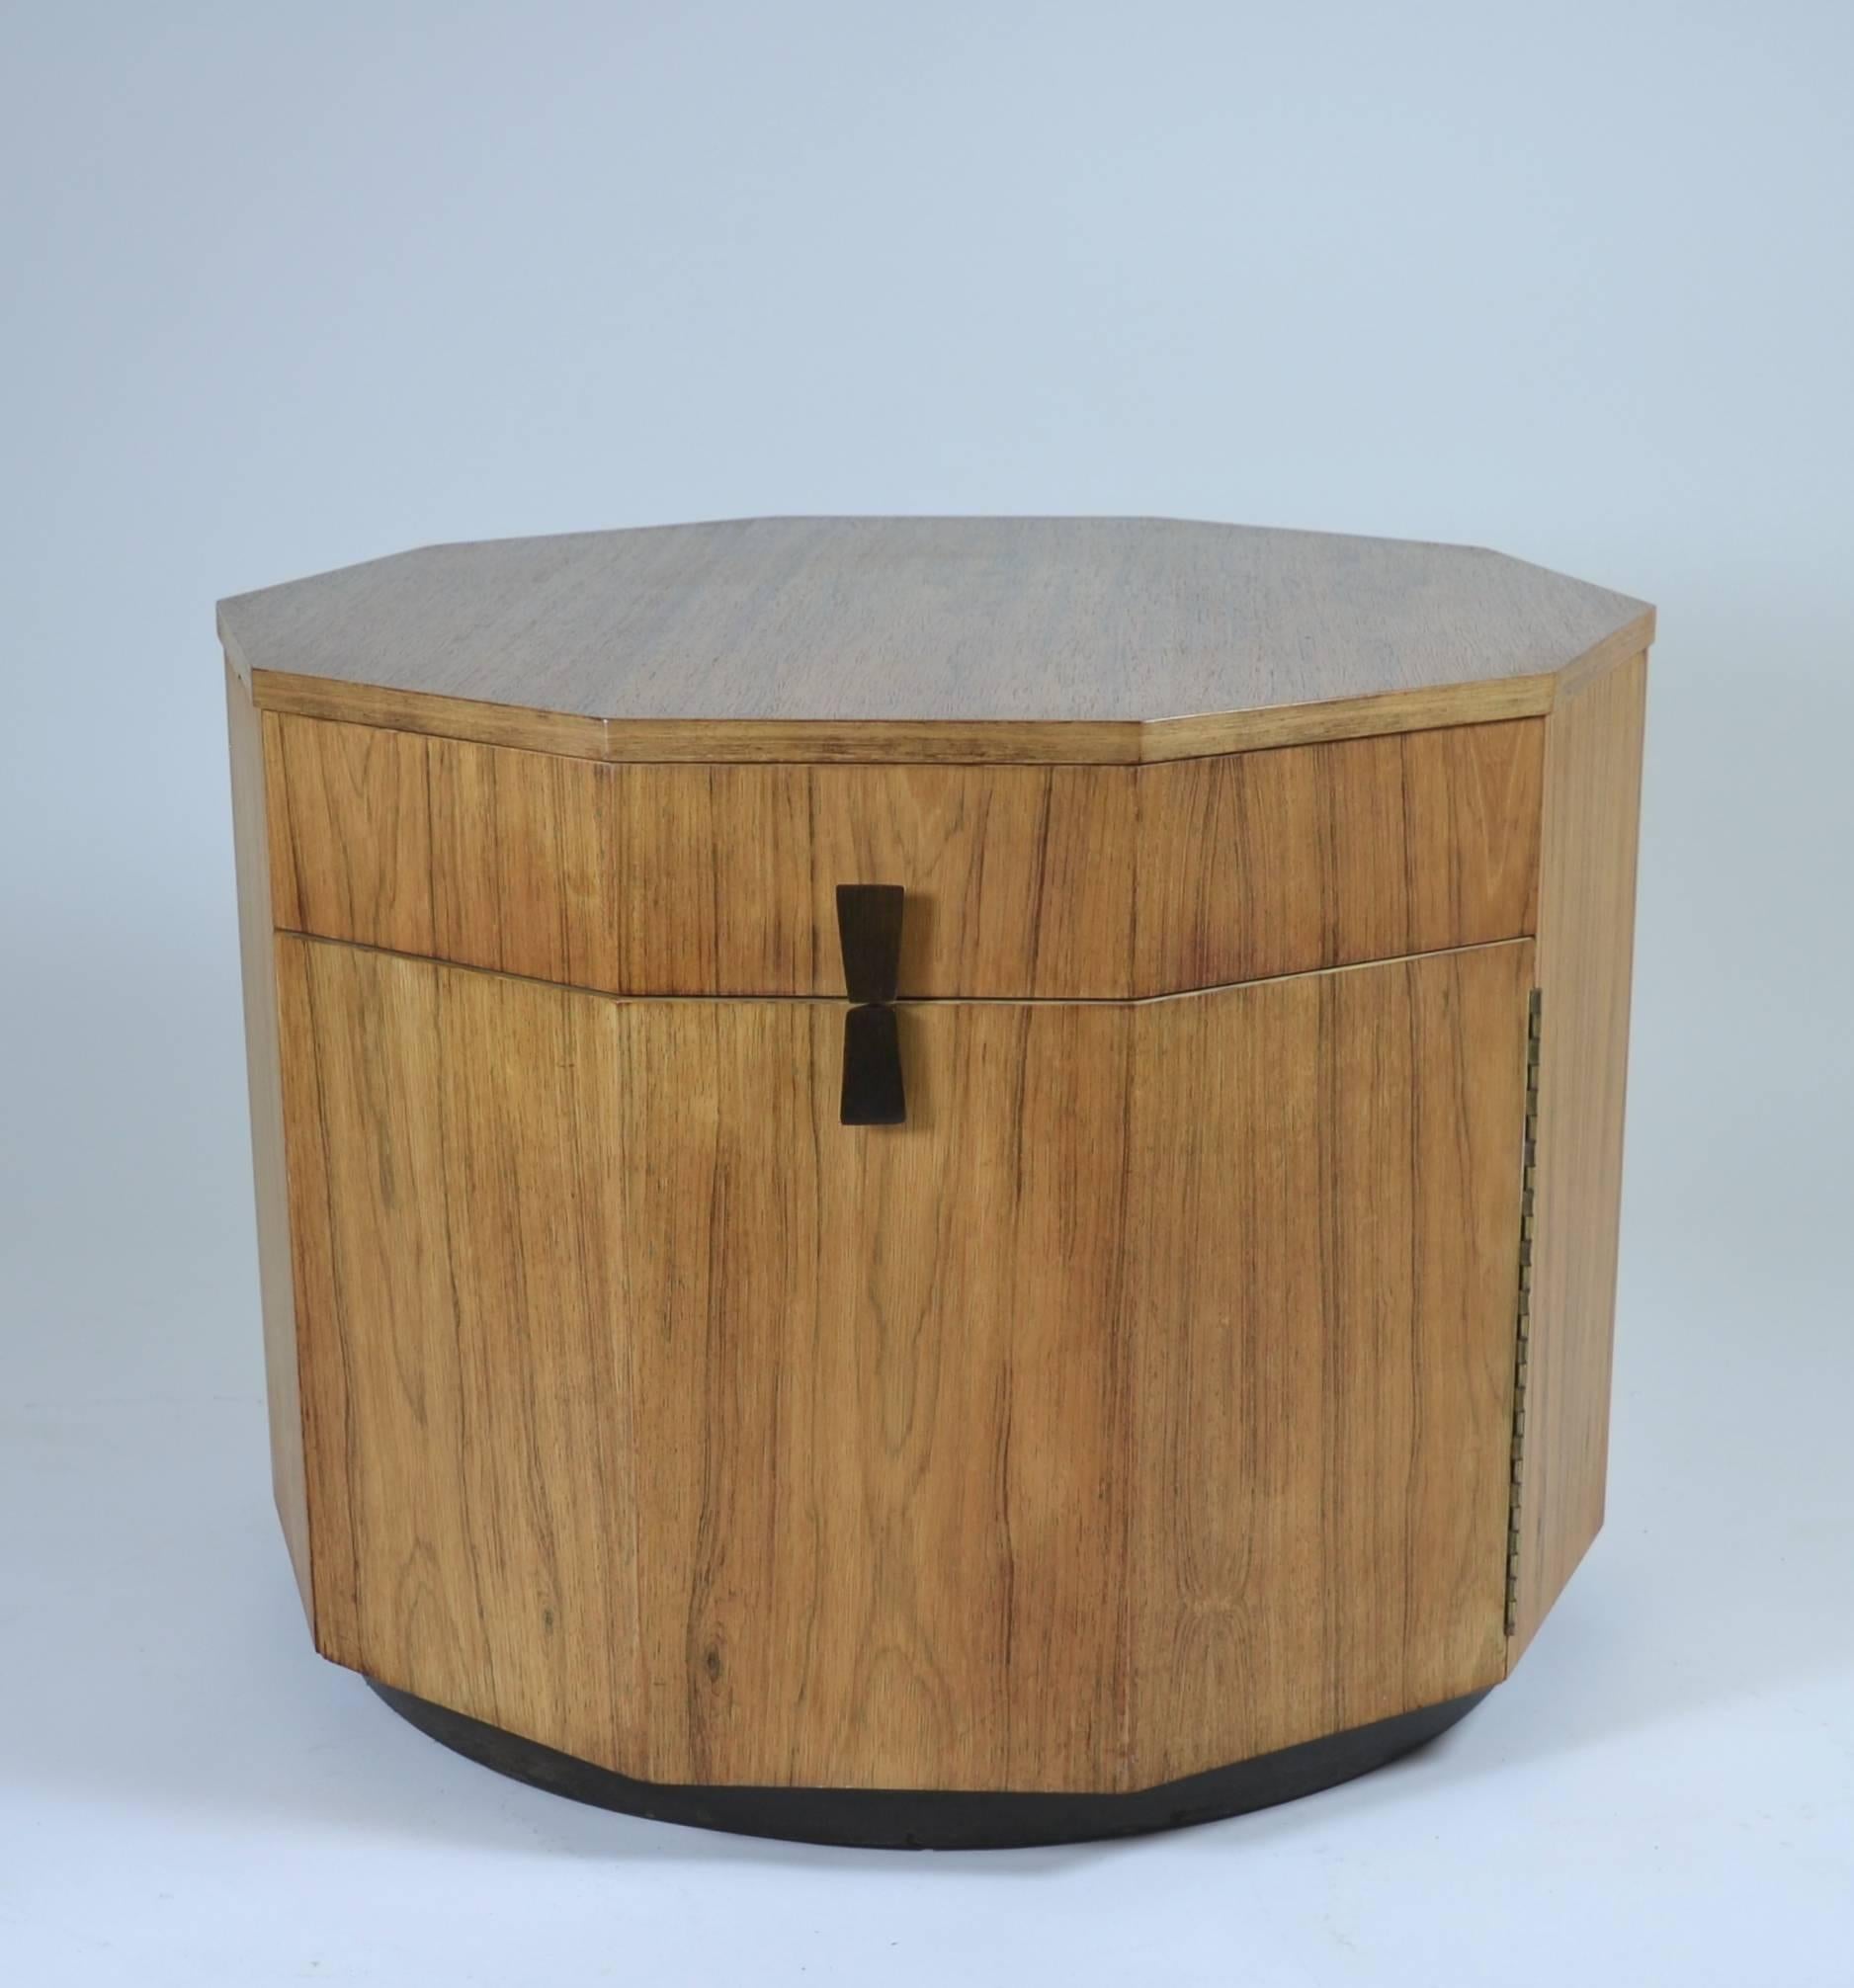 This blonde rosewood example of Harvey Probber's Classic Decagon table is the largest size, at 30" x 22.5". Originally created as a dry bar, it features a bottle shelf on a hanged door and a large storage compartment; also a wide drawer.